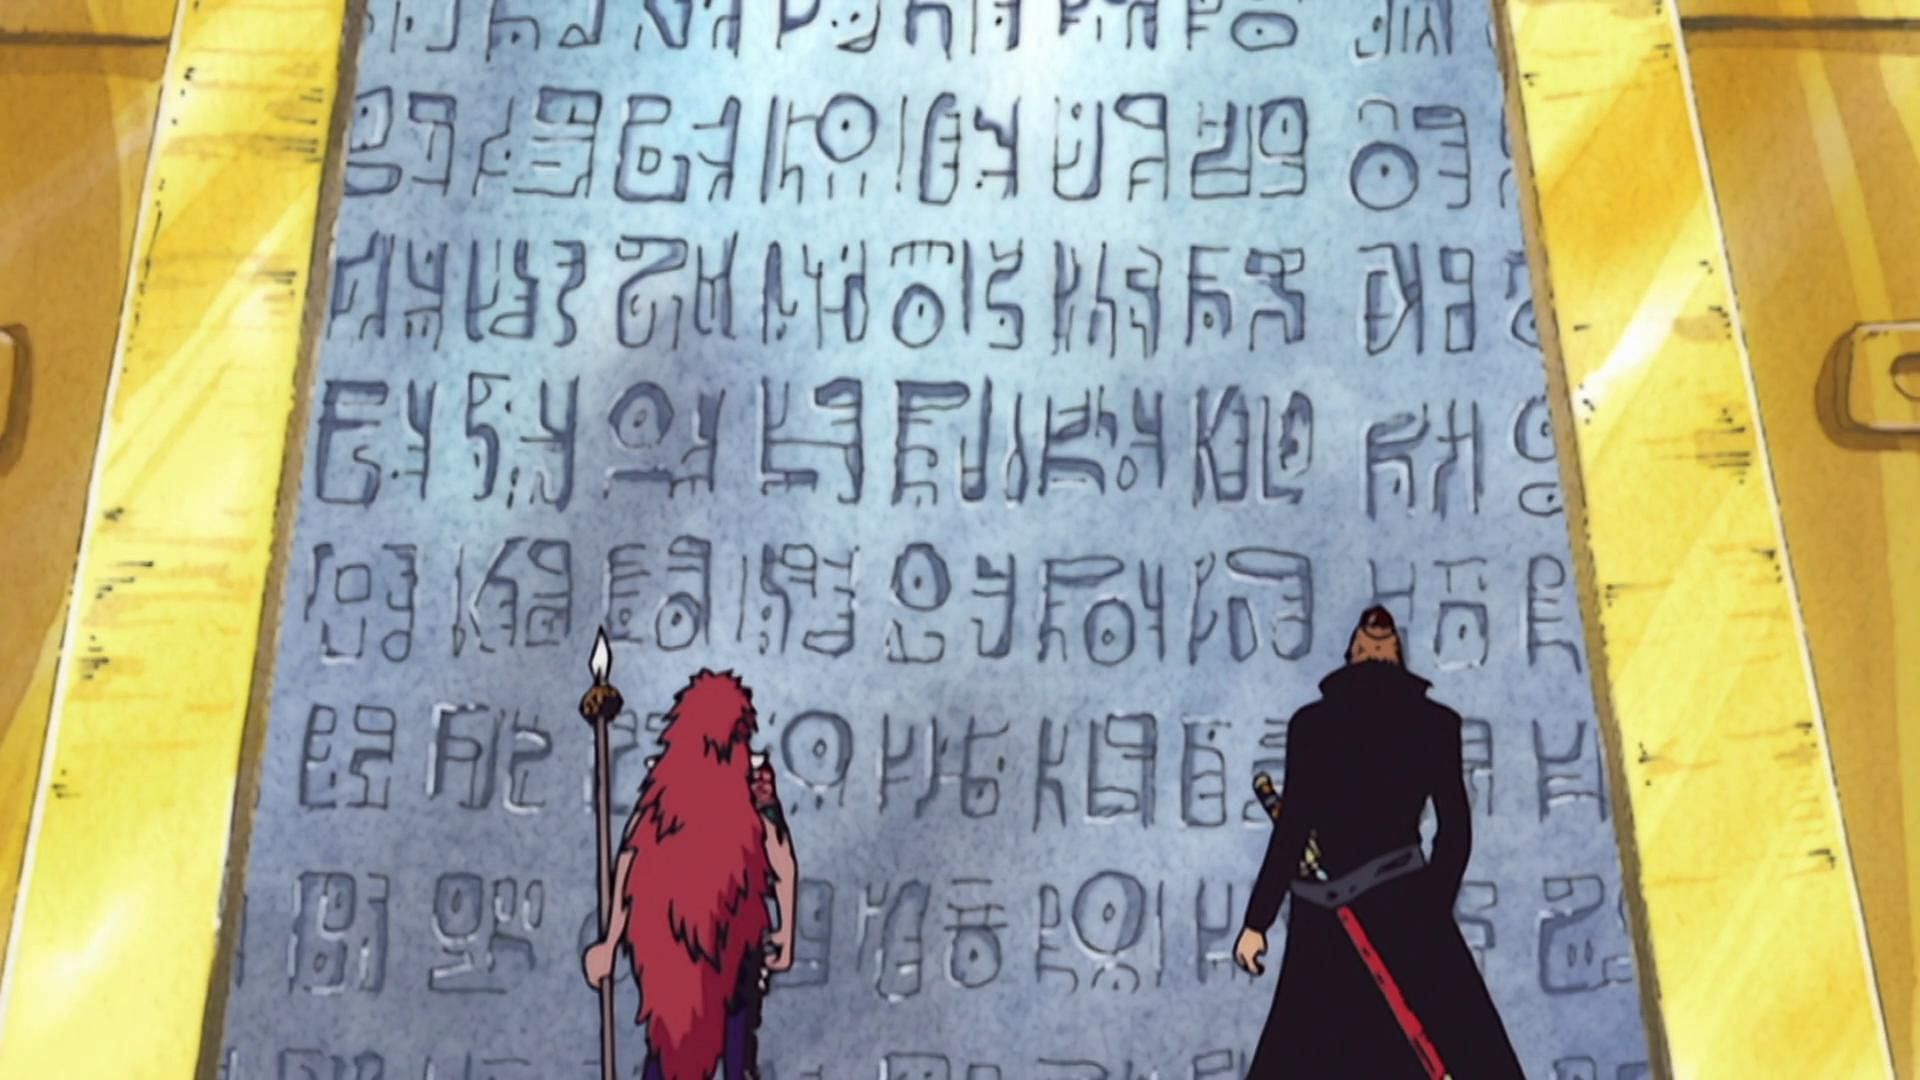 Kalgara and Noland in front of Skypiea&#039;s Poneglyph, as seen in the One Piece anime (Image via Toei Animation, One Piece)